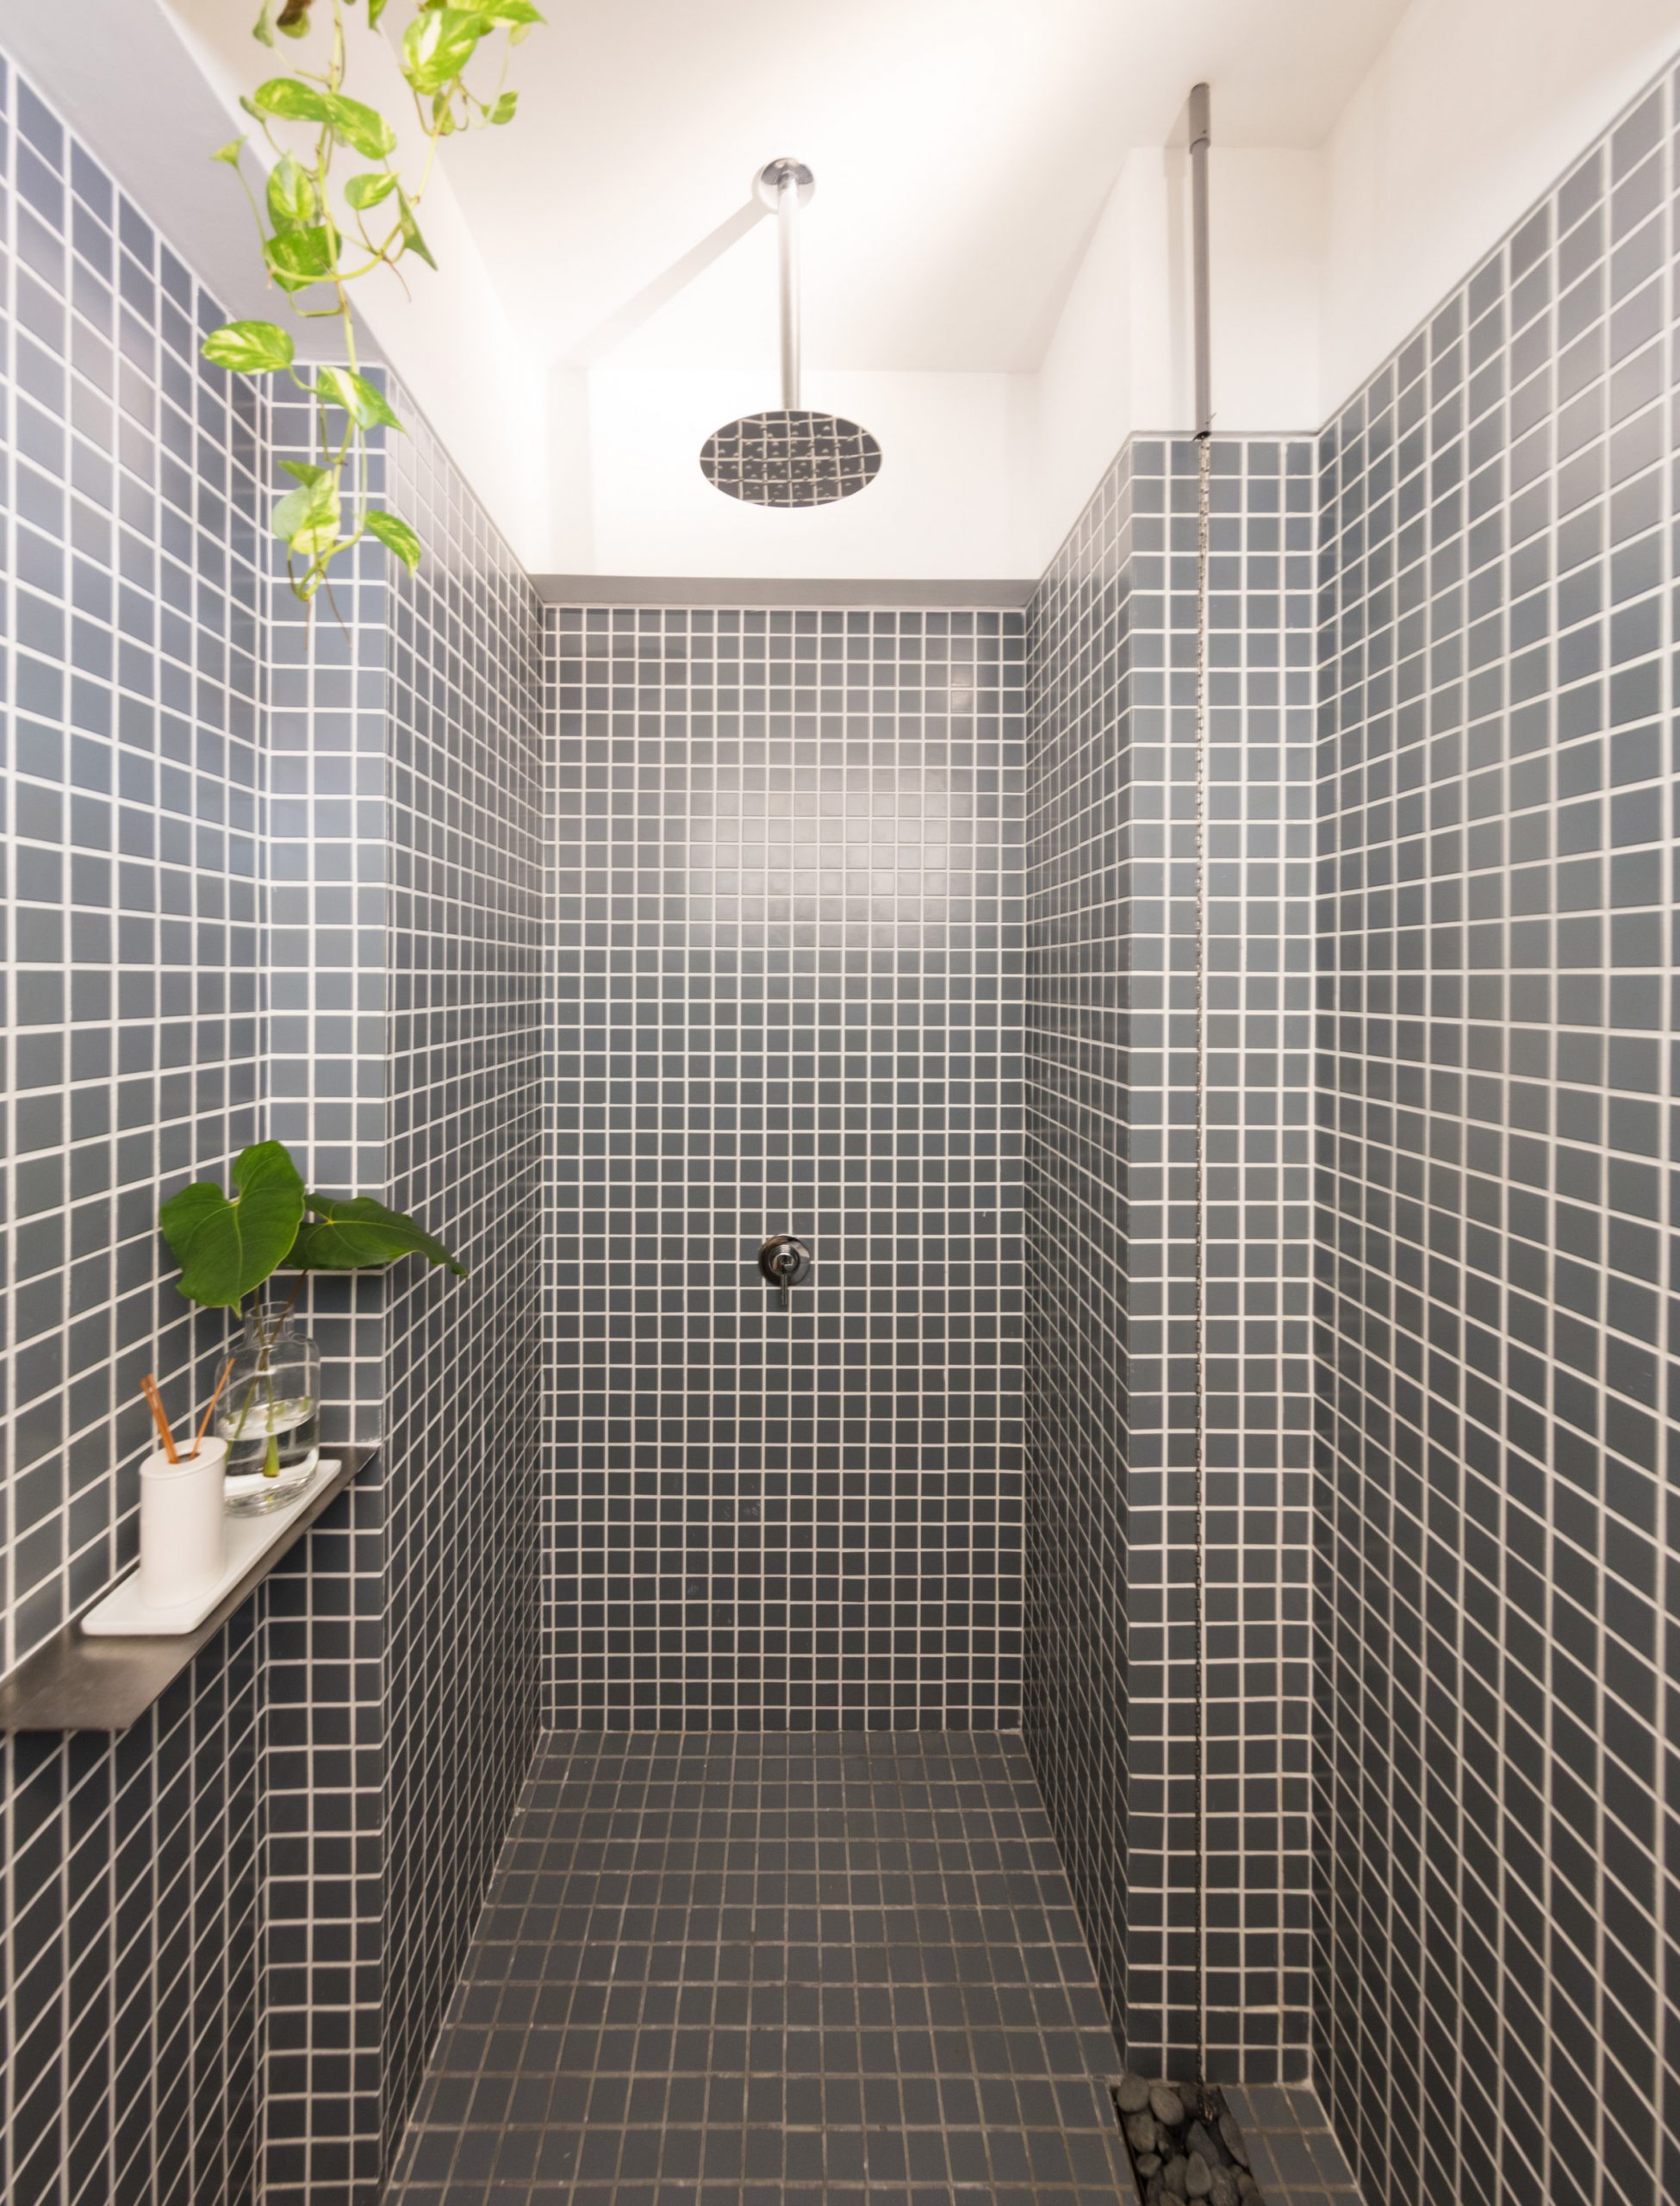 Tiled bathroom of Project #13 by Studio Wills + Architects